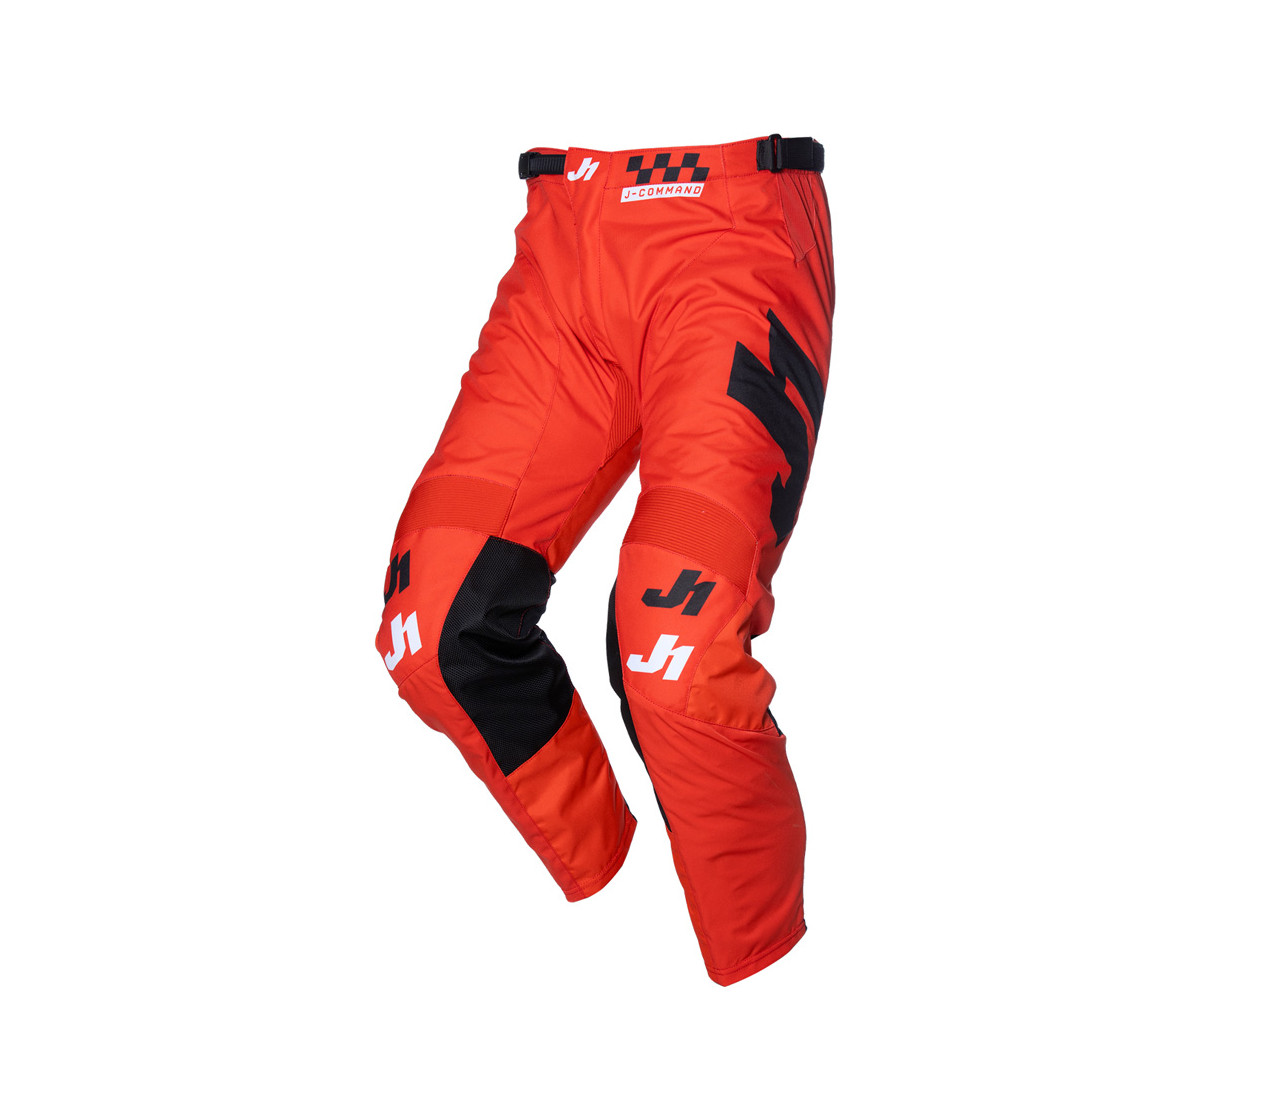 JUST1 PANTS J-COMMAND COMPETITION RED BLACK WHITE